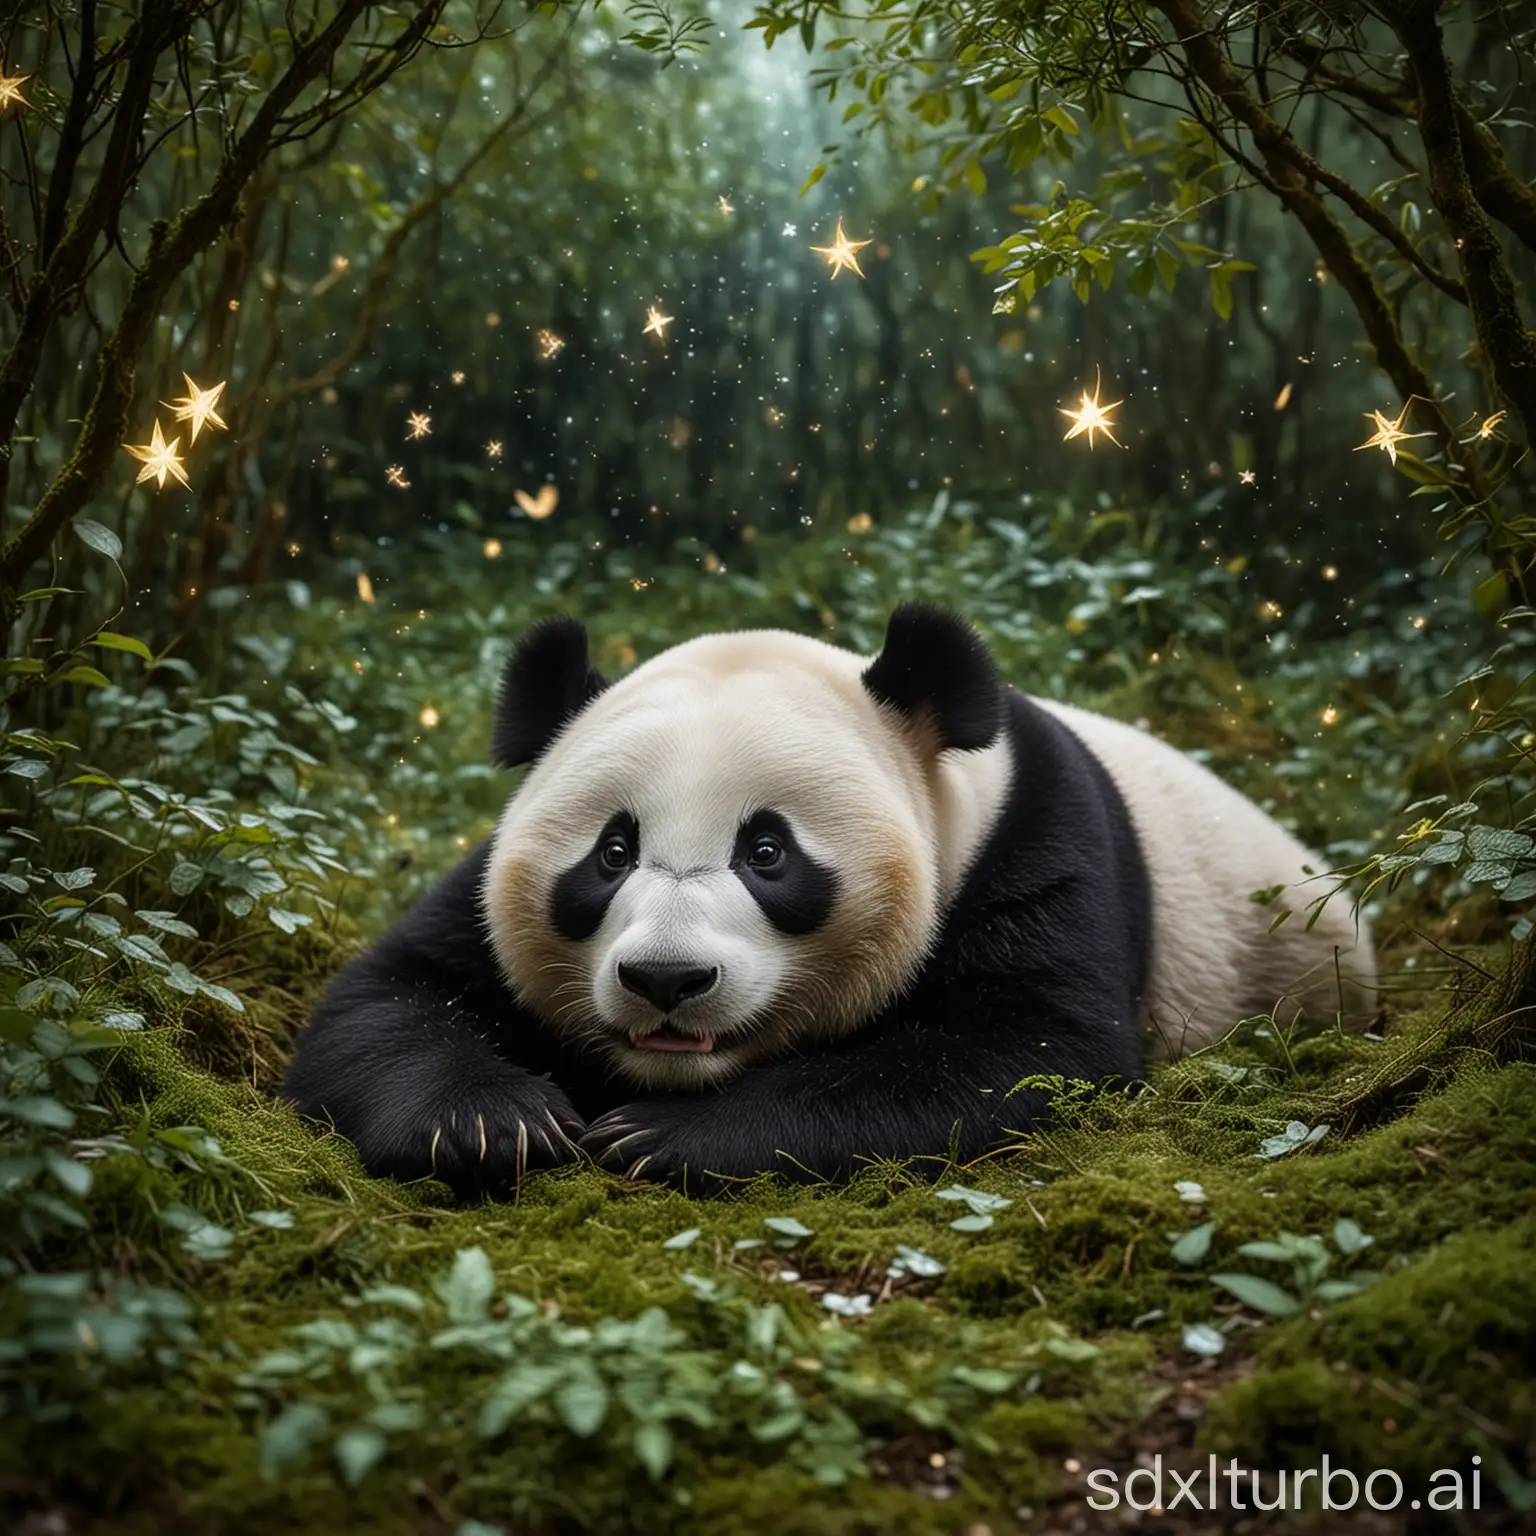 Under a canopy of leaves and branches the panda rests peacefully on a bed of moss. His snoring mixes with the soft rustling of leaves in the wind, while the stars above him twinkle like diamonds.